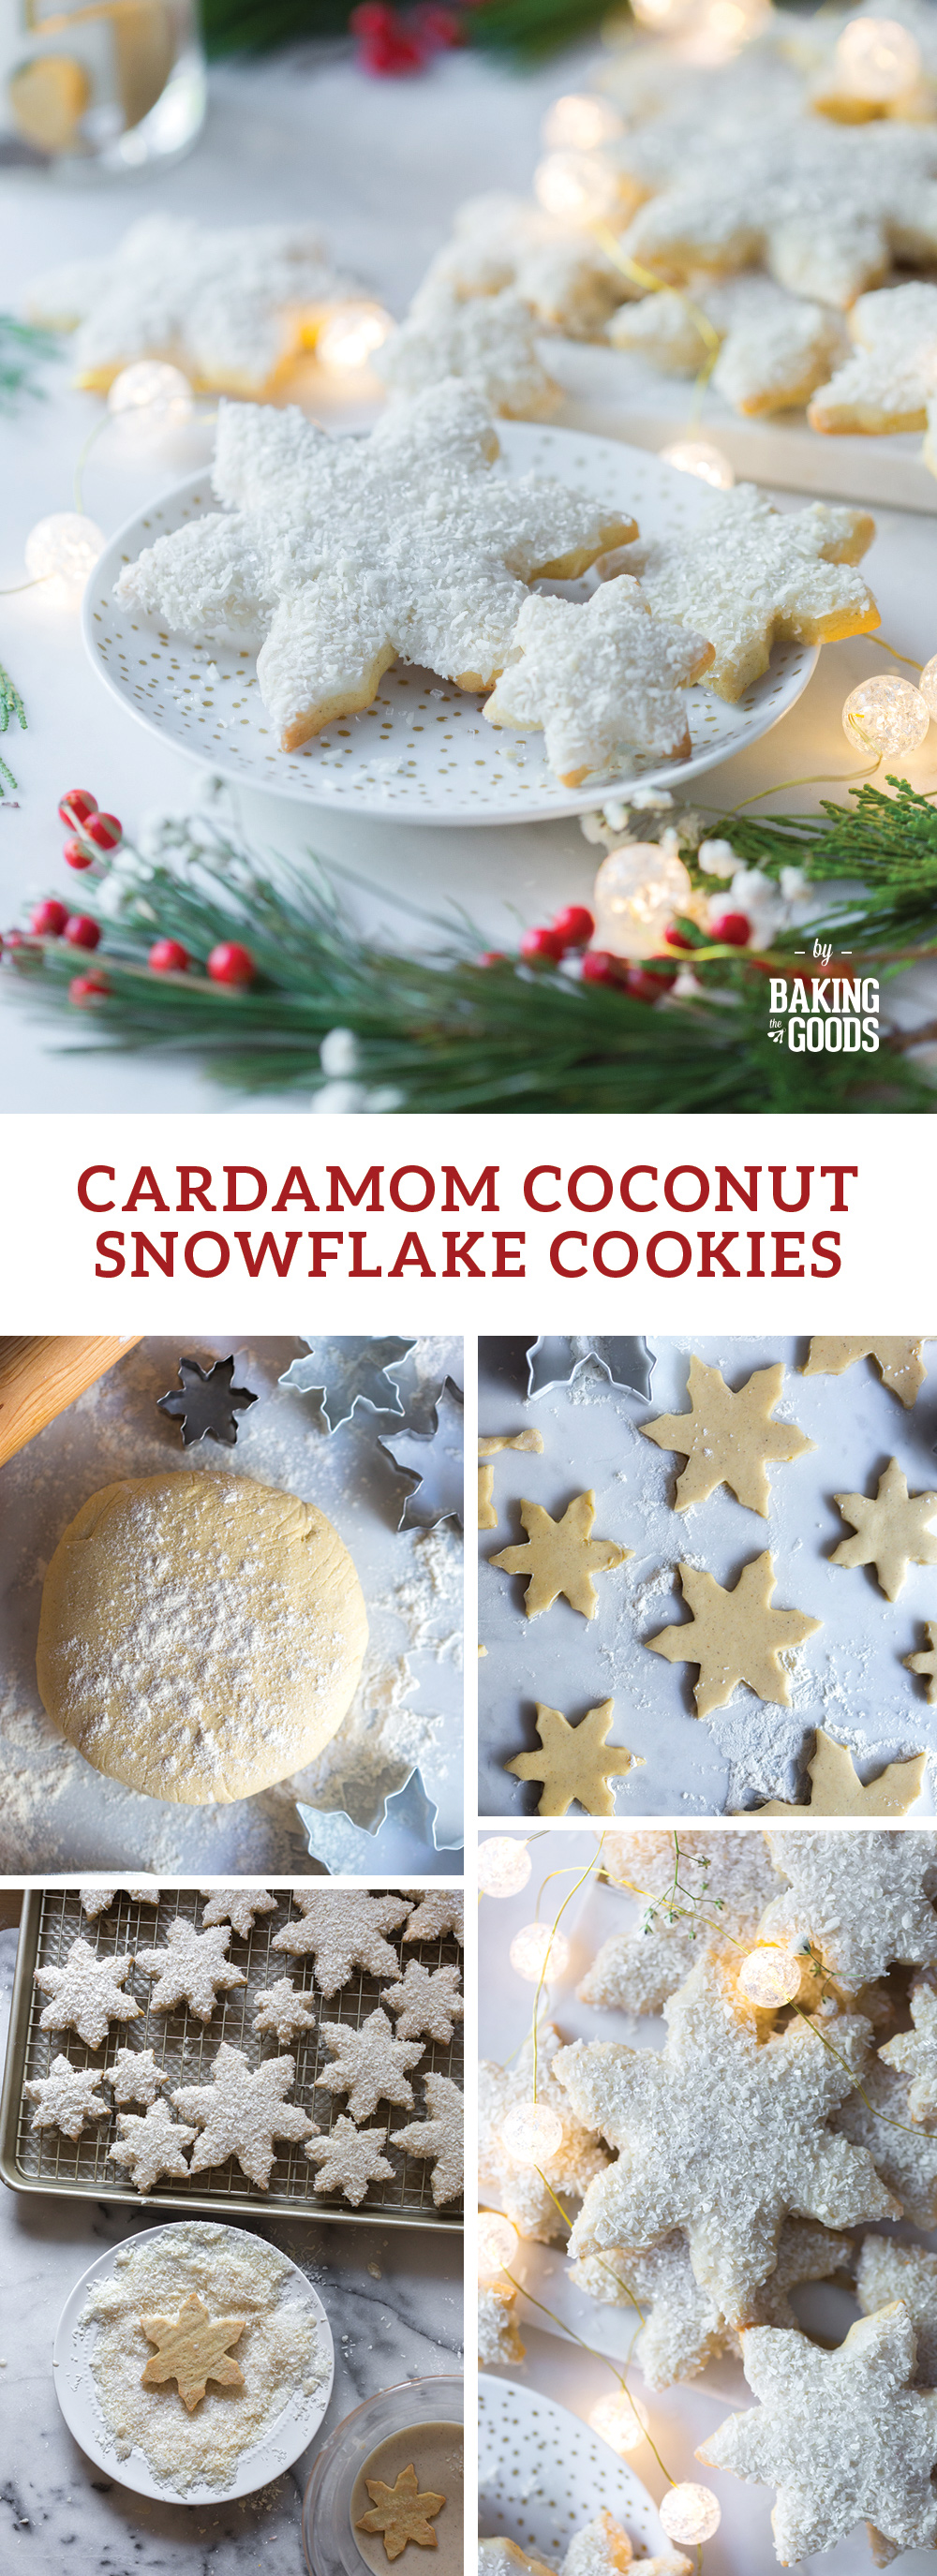 Cardamom Coconut Snowflake Cookies by Baking The Goods